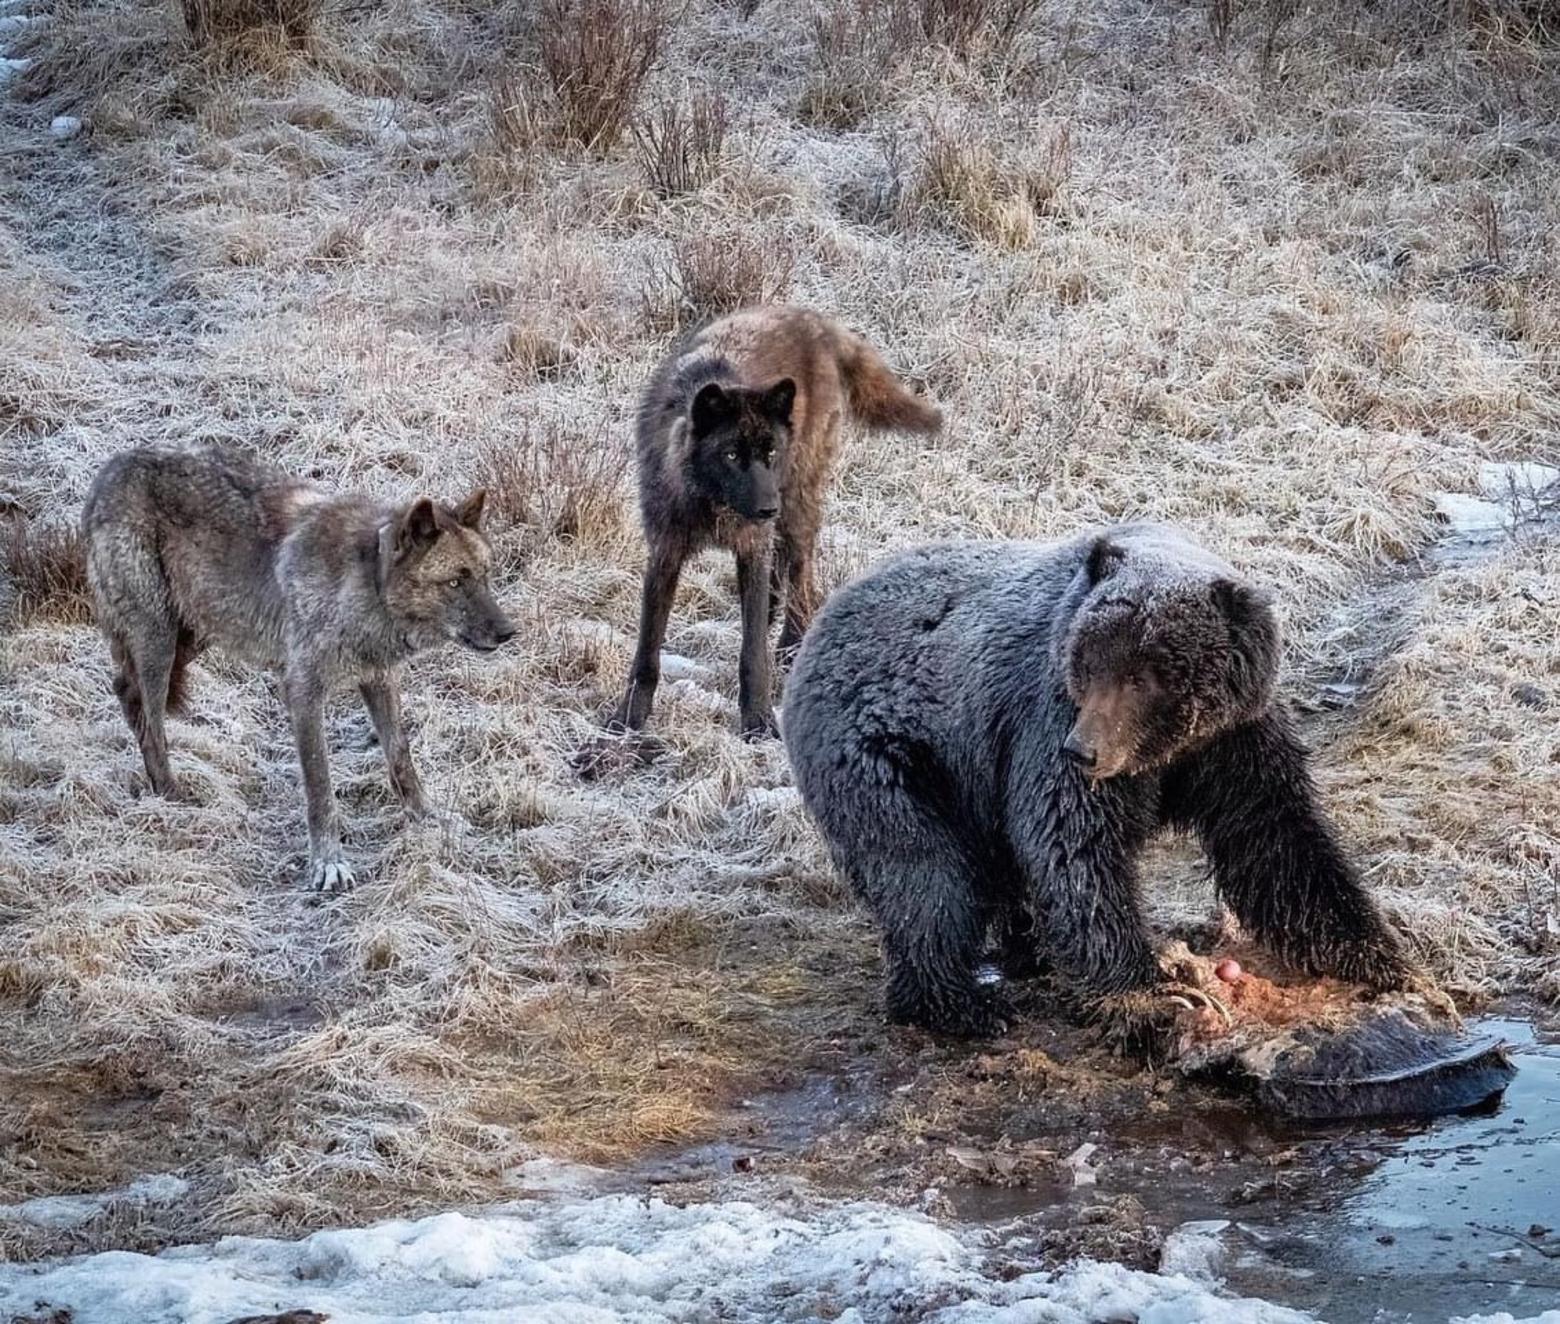 Grizzly bears and wolf kills appear similar: they tend to peel their victims' hides and leave them intact. They also scavenge mountain lion kills prompting cougars to cache their prey. Photo by Ben Bluhm